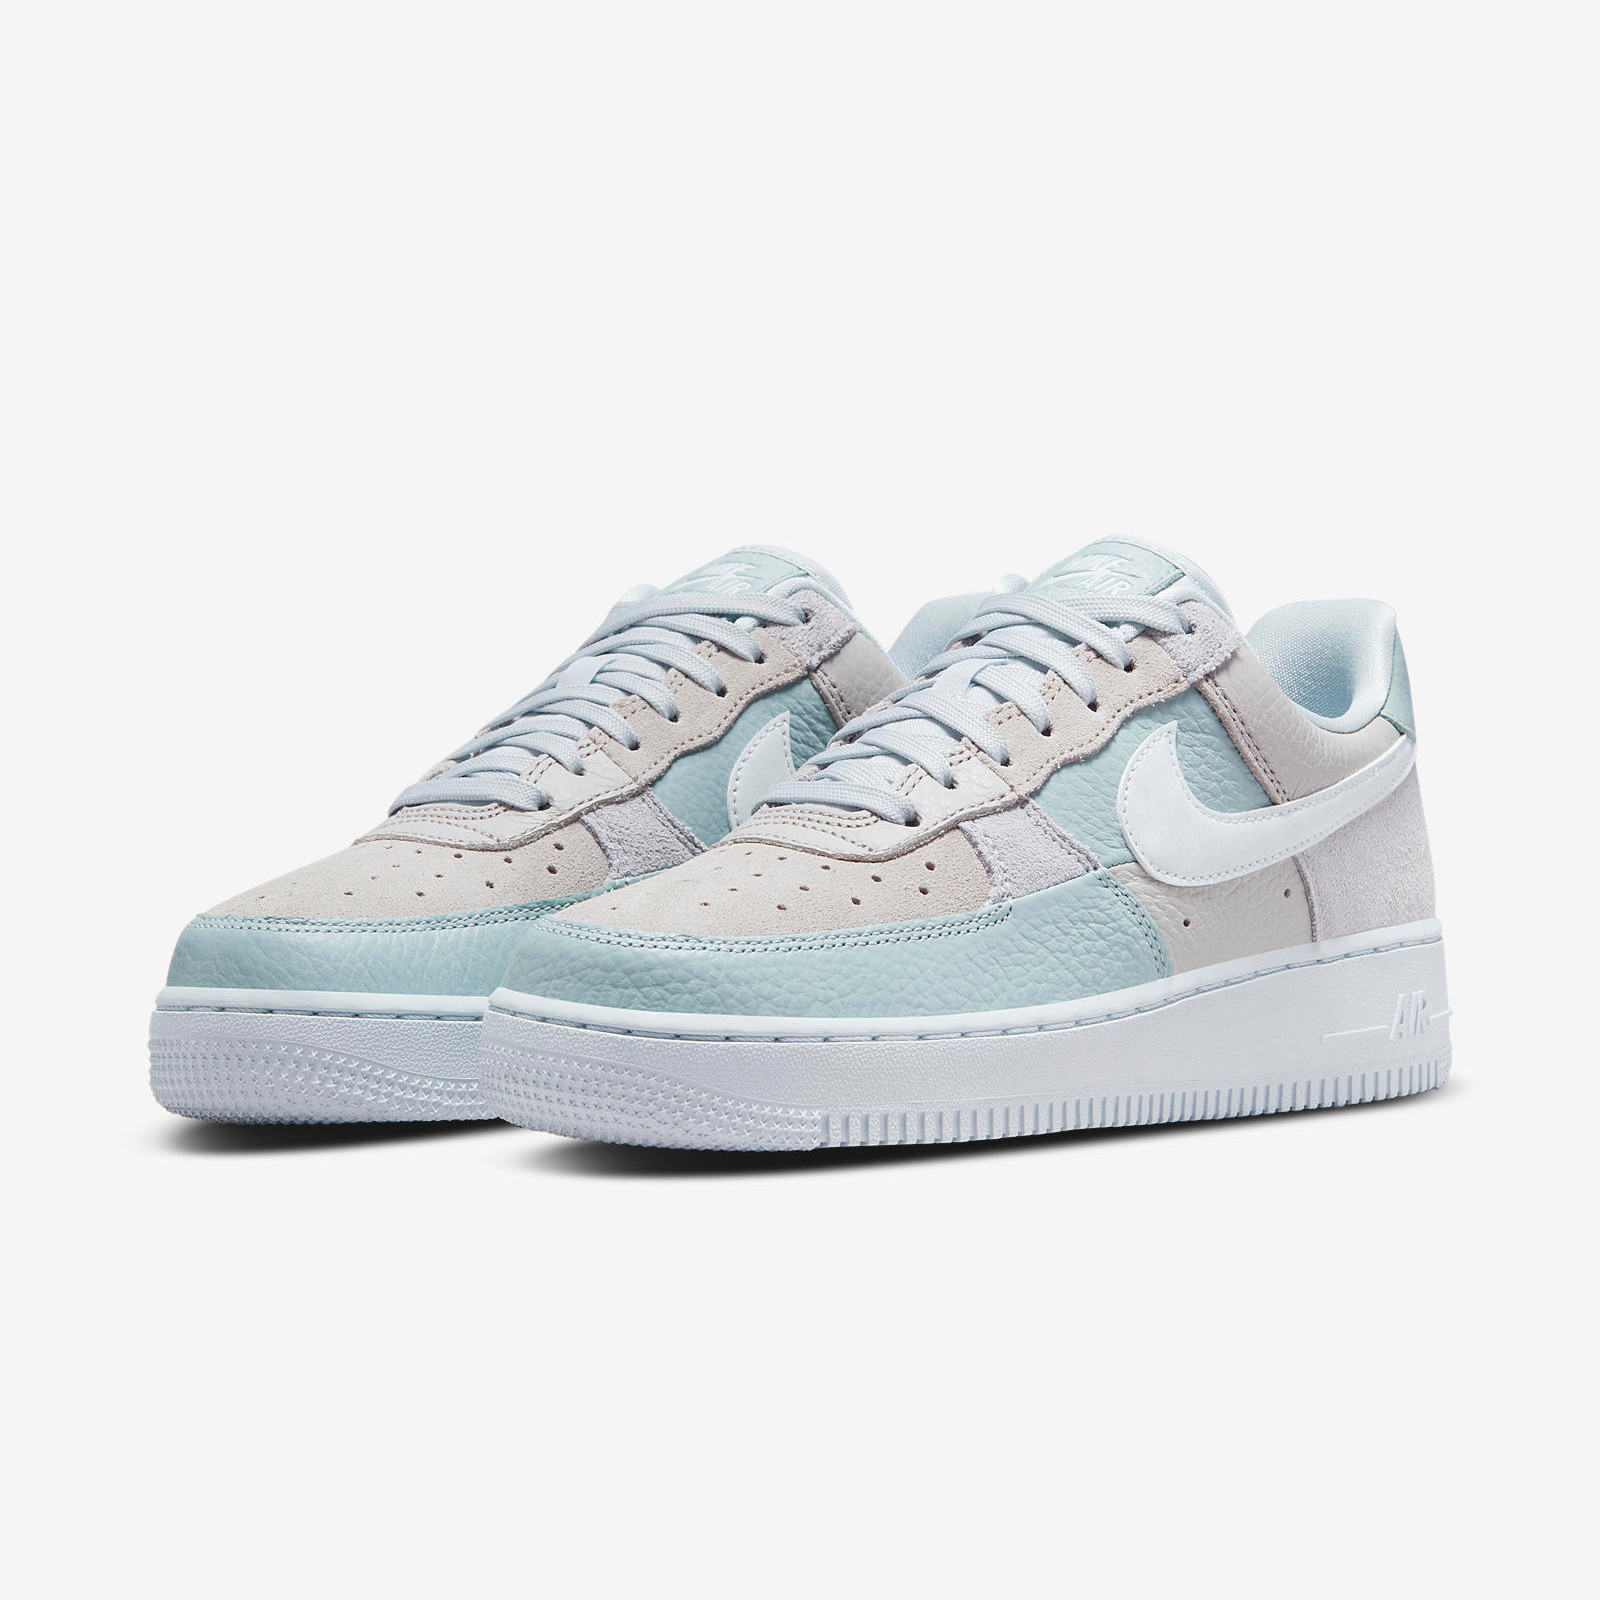 Nike Air Force 1 Low
« Be Kind »